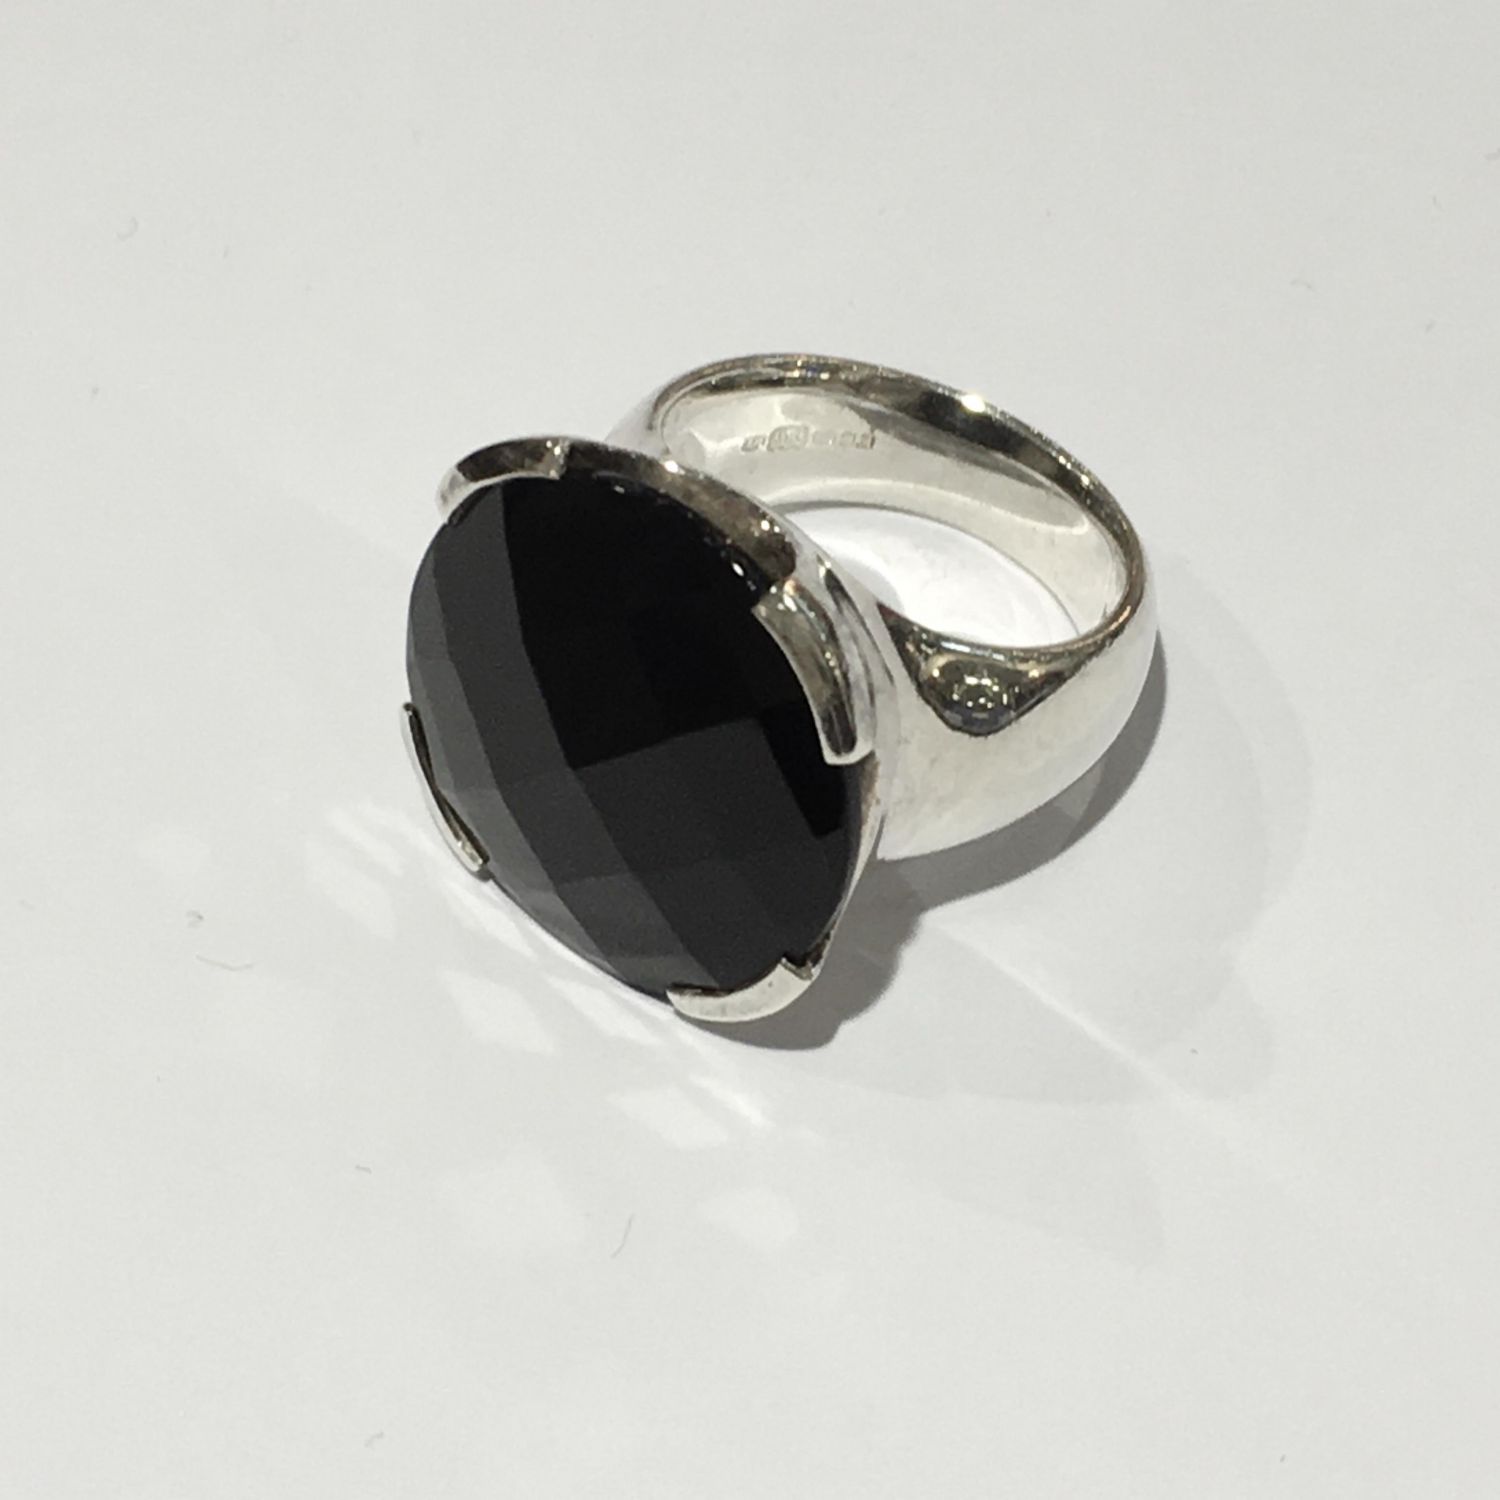 Vintage Silver & Jet Onyx Monet Ring - Gifts for Every Occasion ...